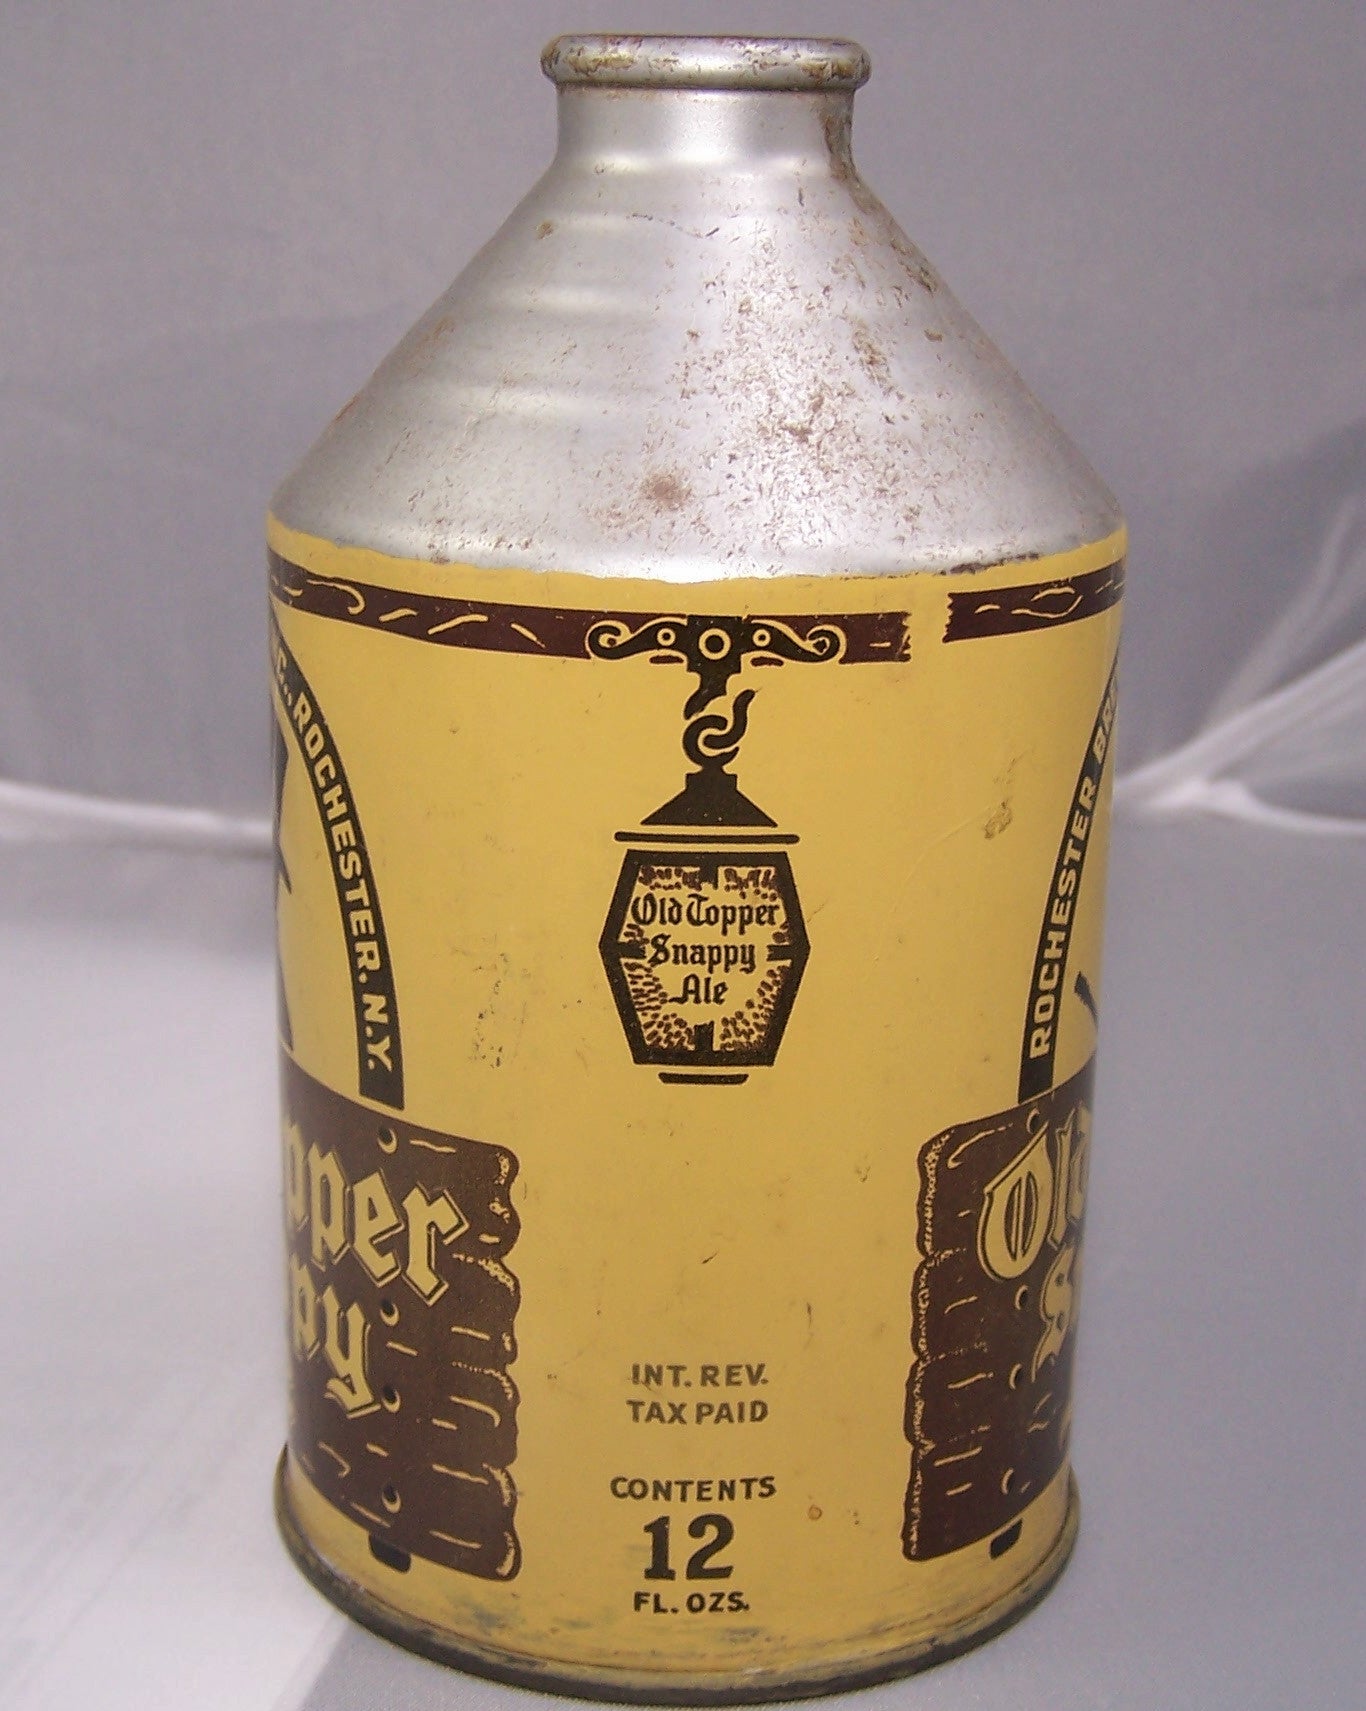 Old Topper Snappy Ale, USBC 197-29, Grade 1 Sold 3/2/15